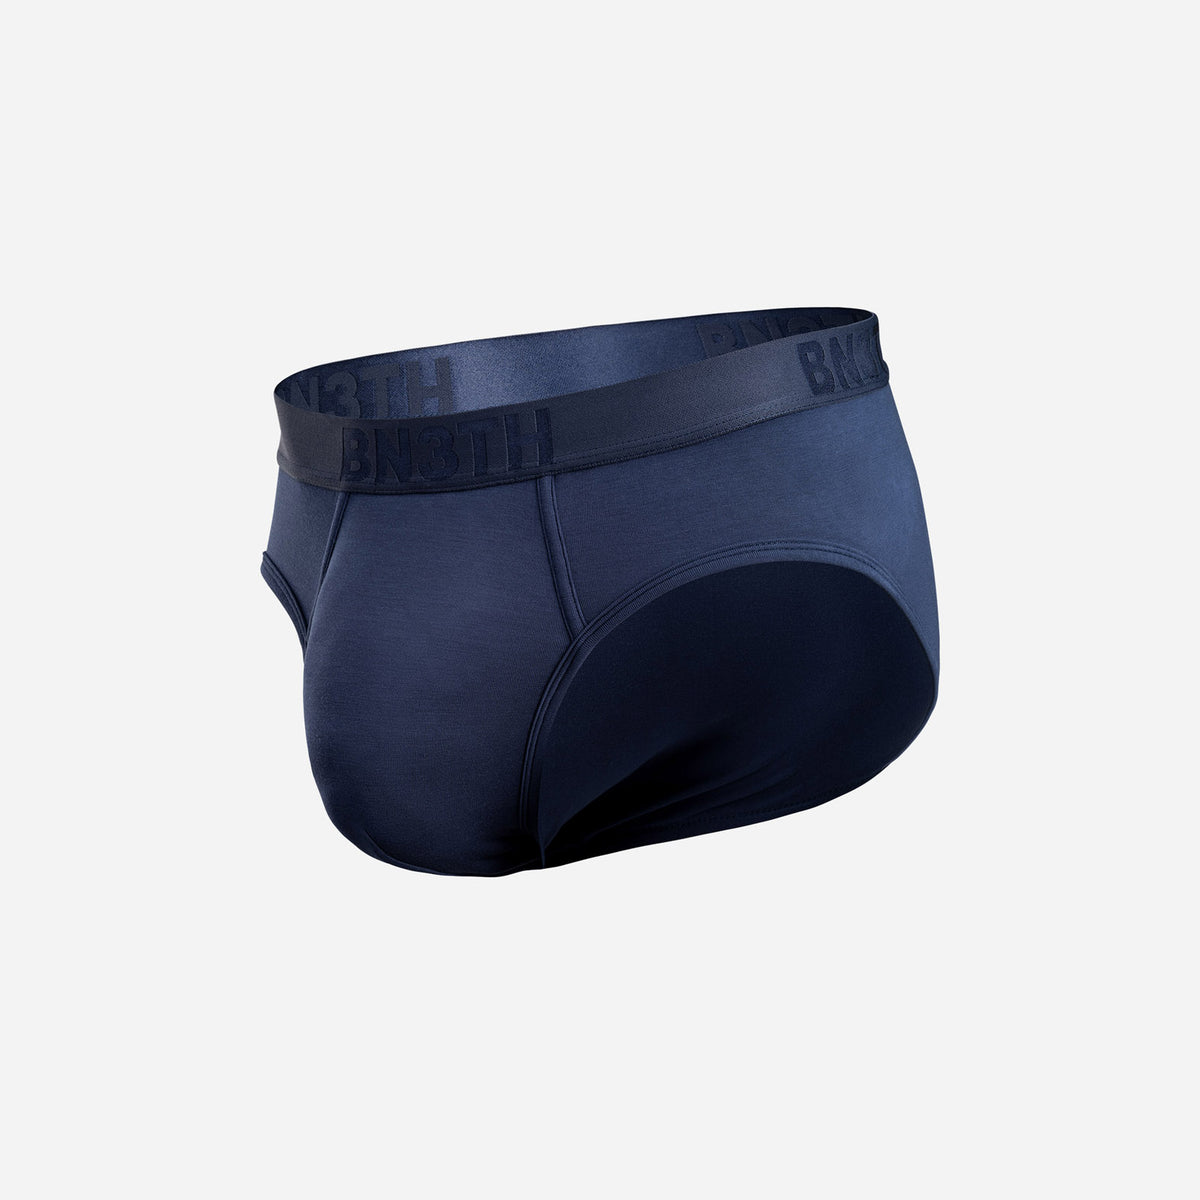 CLASSIC BOXER BRIEF WITH FLY: NAVY